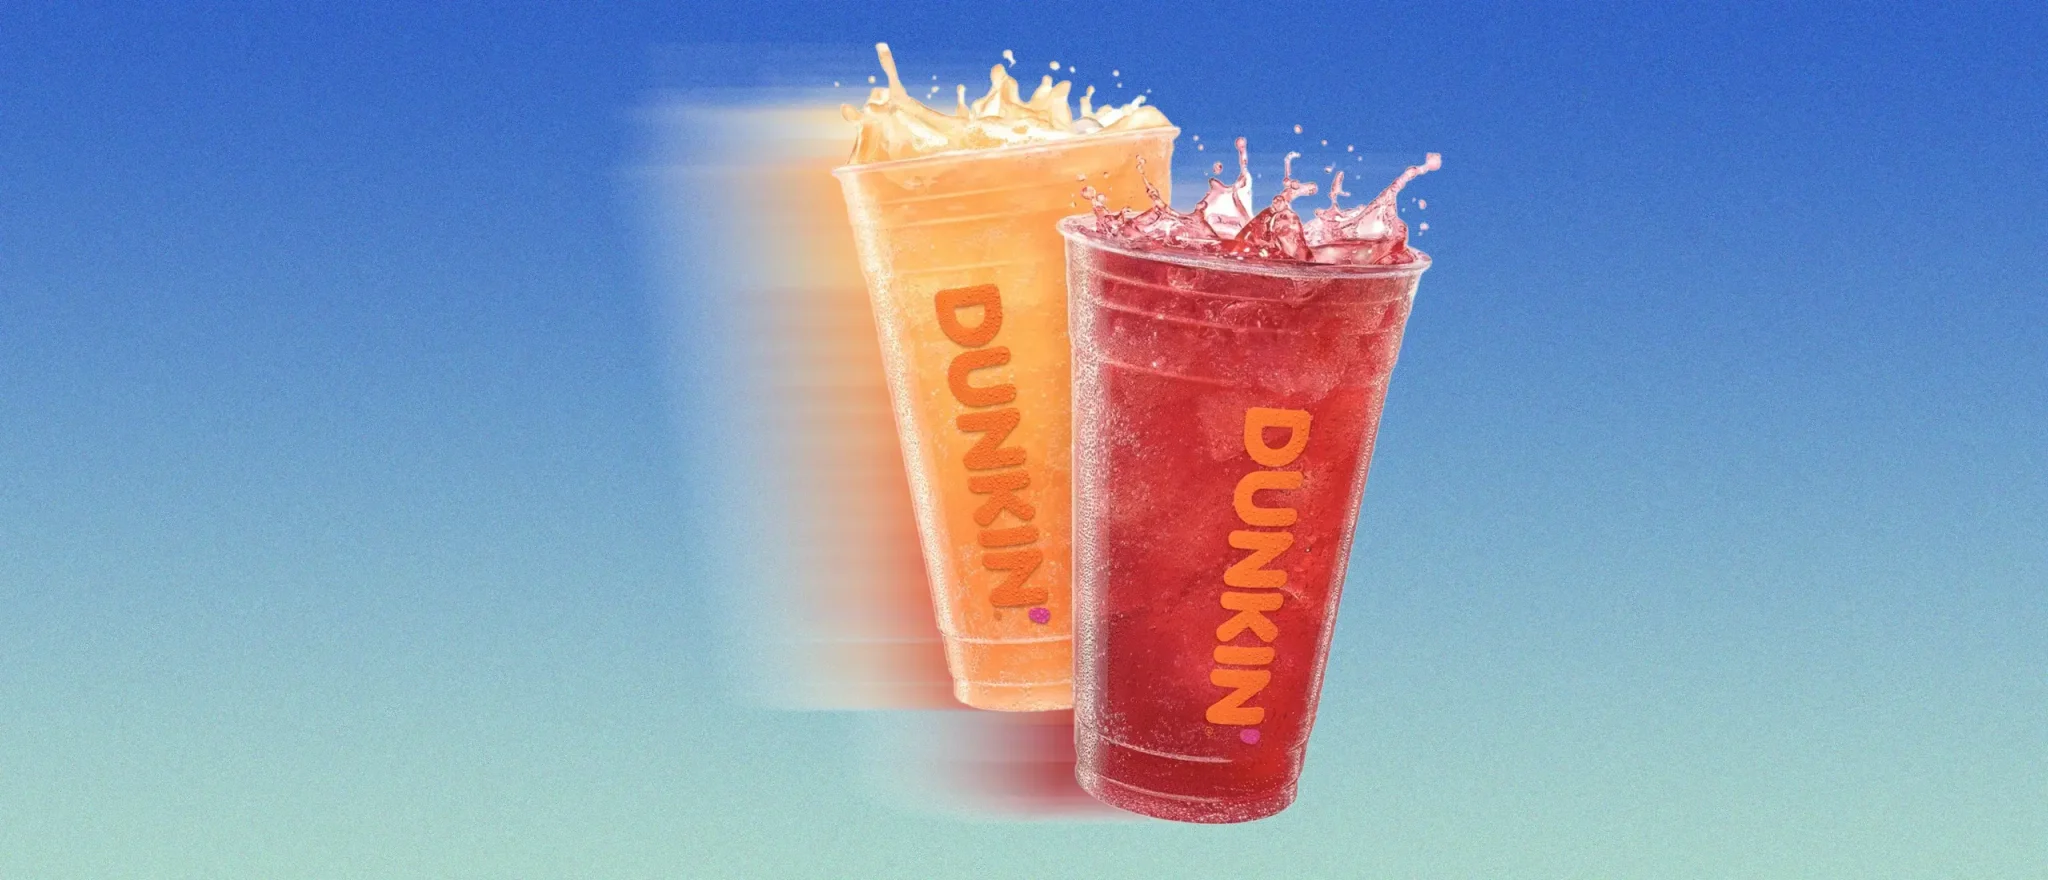 Not Even the Panera Controversy Can Stop Dunkin’ From Launching It’s SPARKD’ Energy Drinks